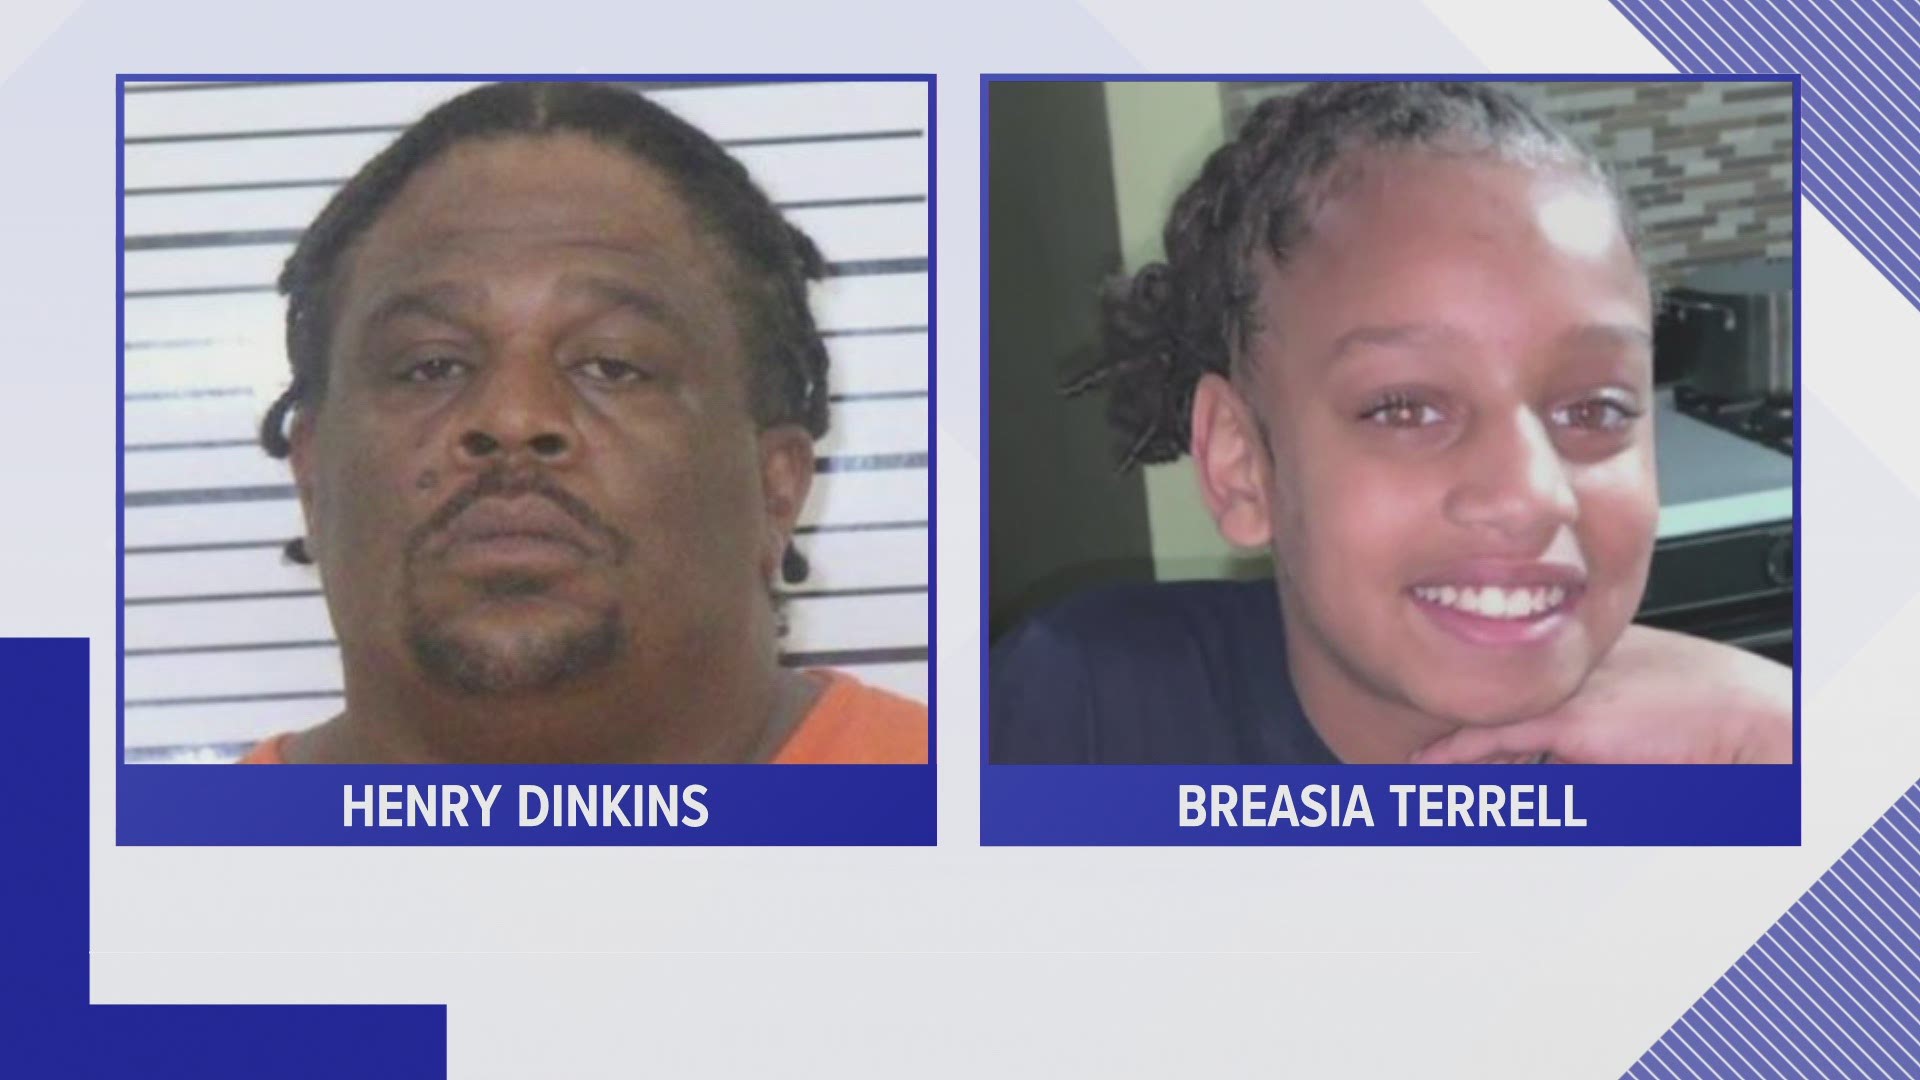 The man charged with murdering 10-year-old Breasia Terrell will not head to trial this month, as originally planned. The trial will be delayed at least four months.